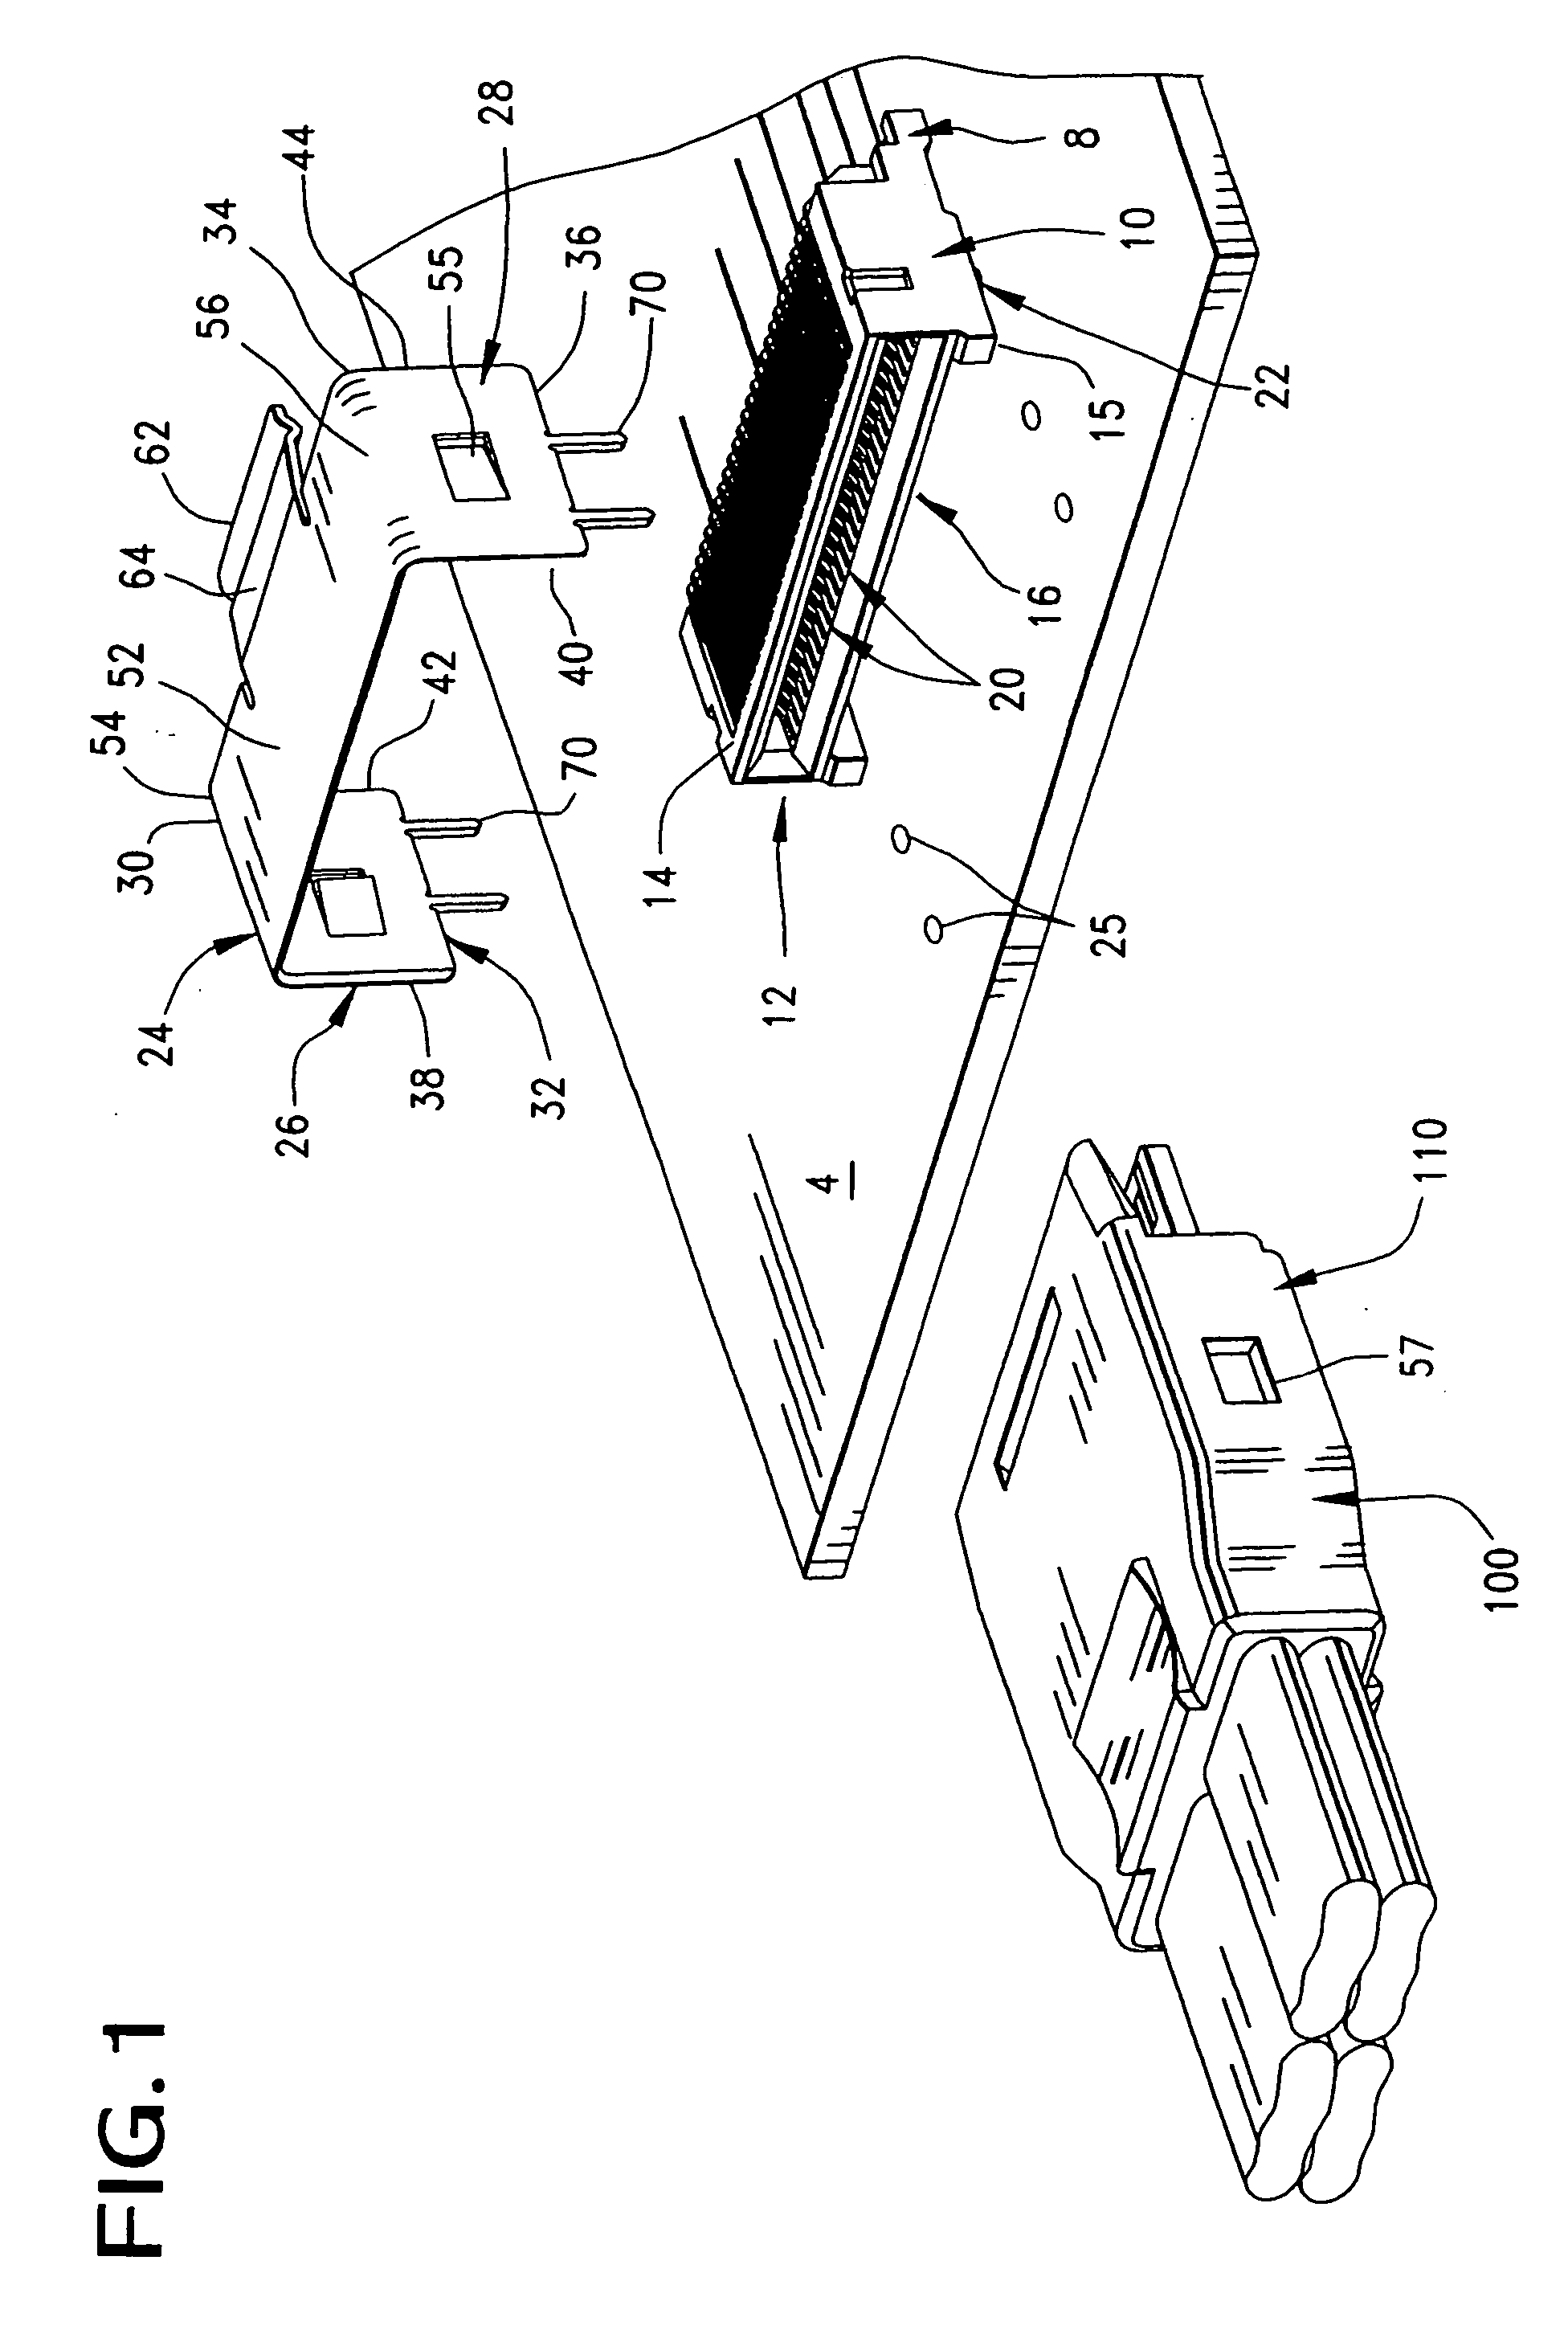 Plug connector with mating protection and alignment means